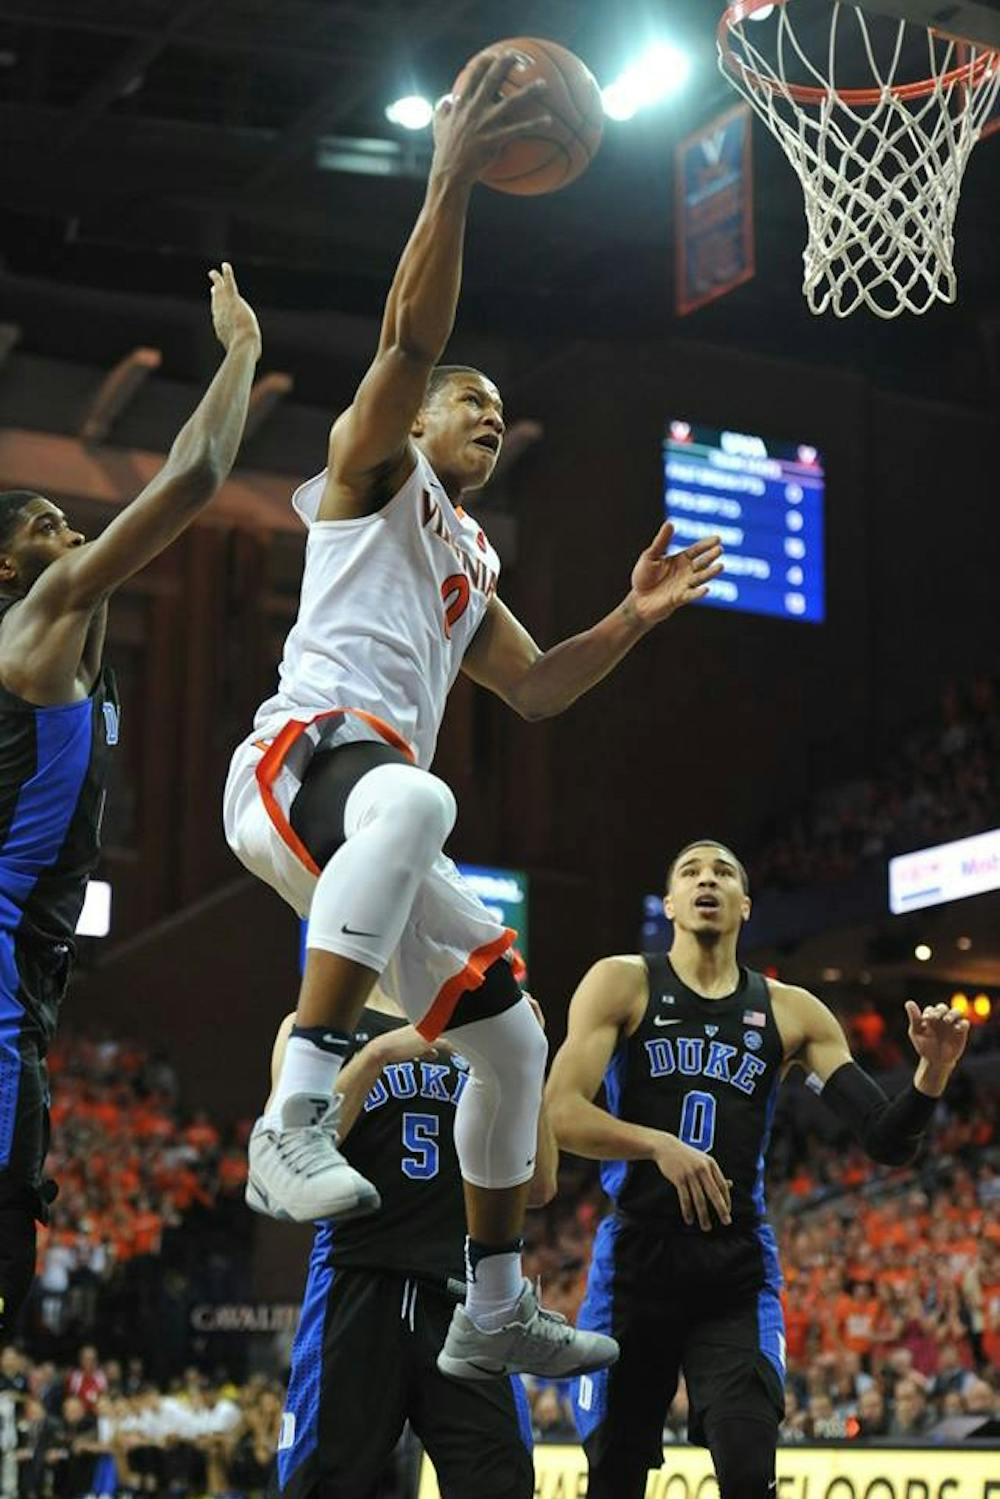 Junior guard Devon Hall&nbsp;shot four-of-10 to contribute eight points in Virginia's loss to Duke.&nbsp;